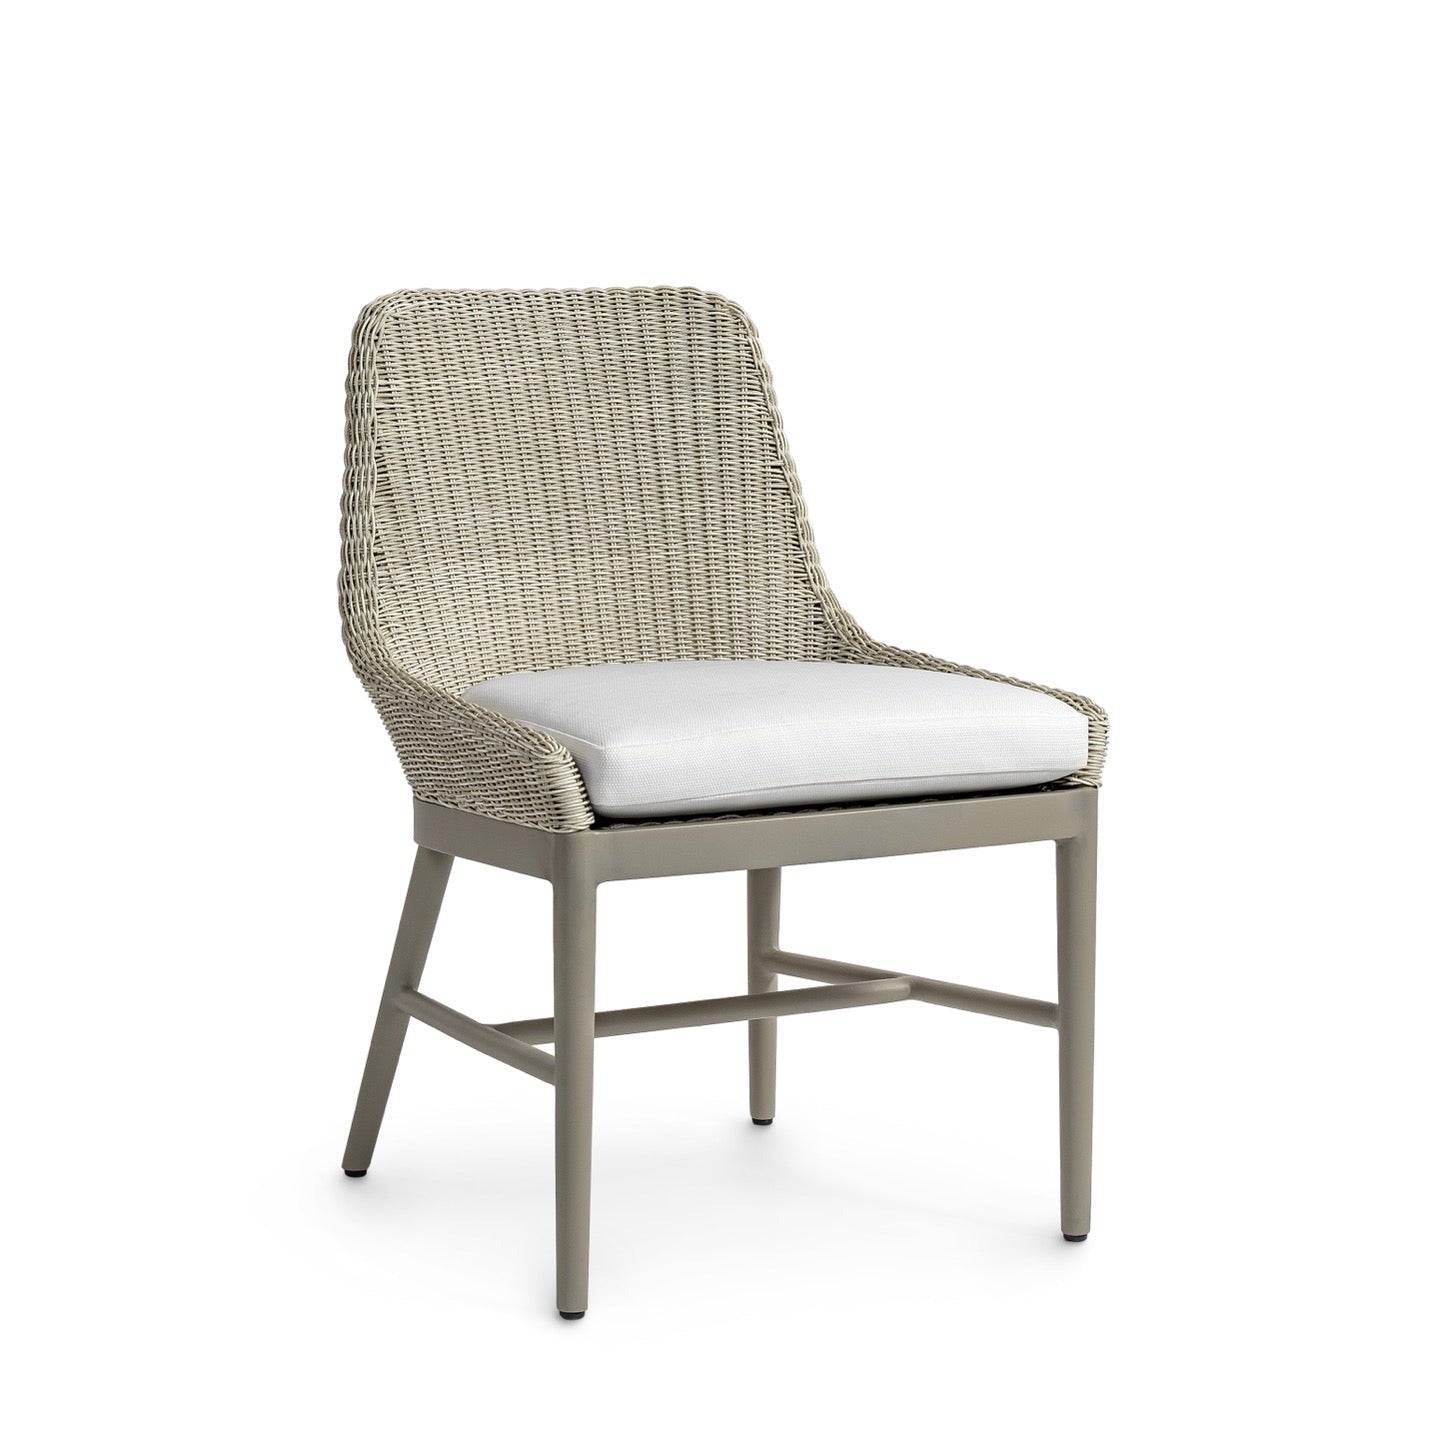 Bedford Outdoor Side Chair